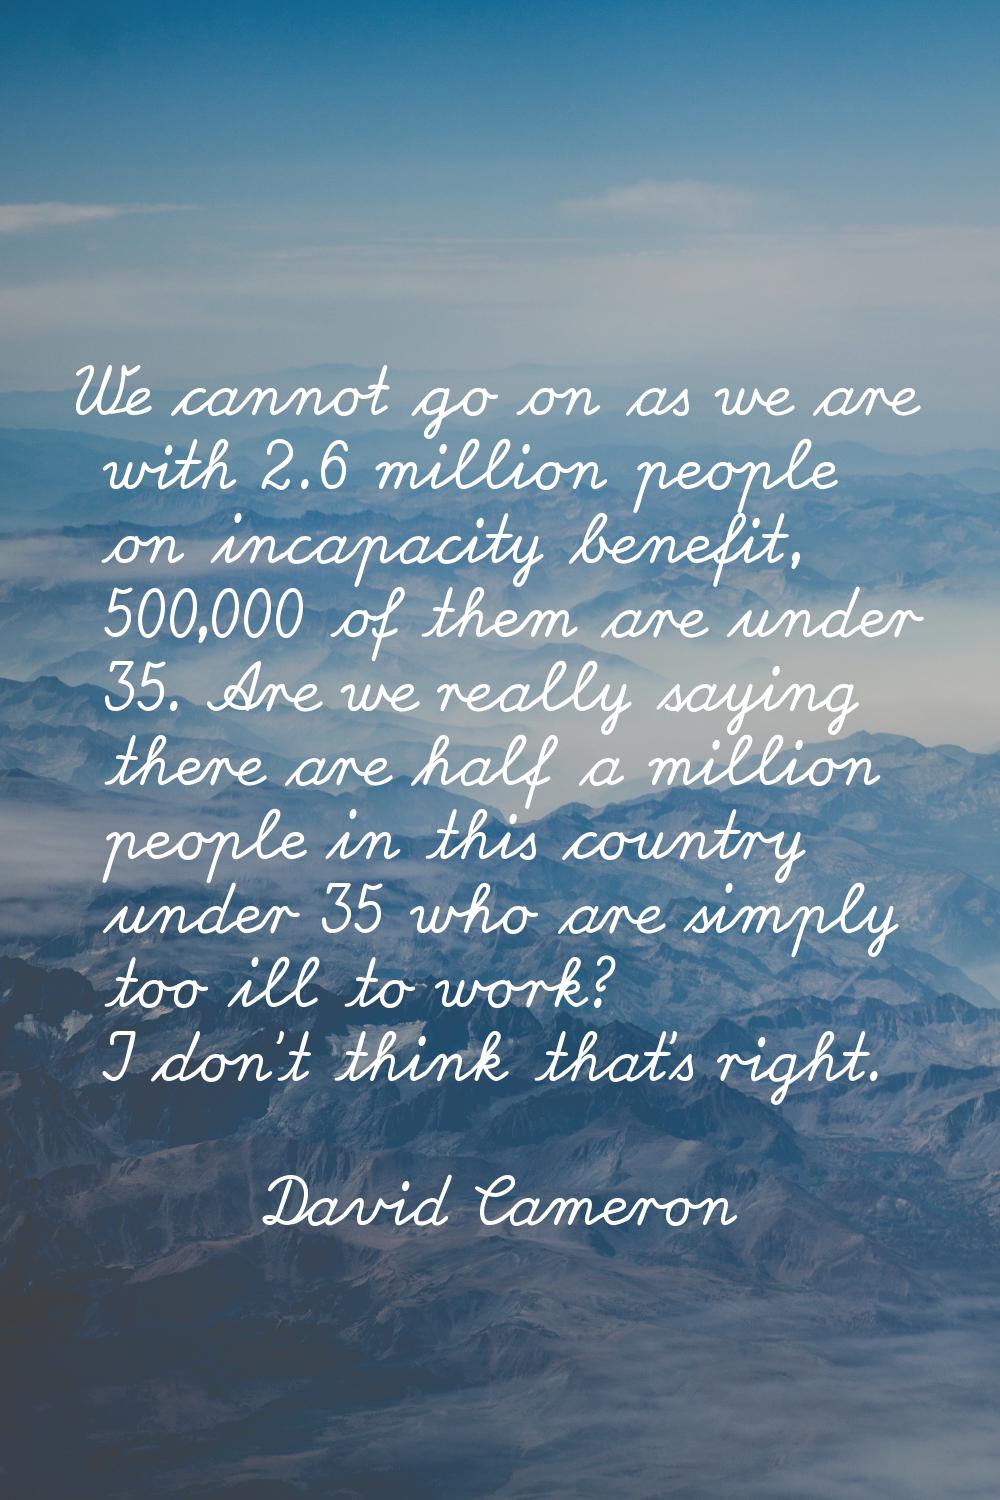 We cannot go on as we are with 2.6 million people on incapacity benefit, 500,000 of them are under 